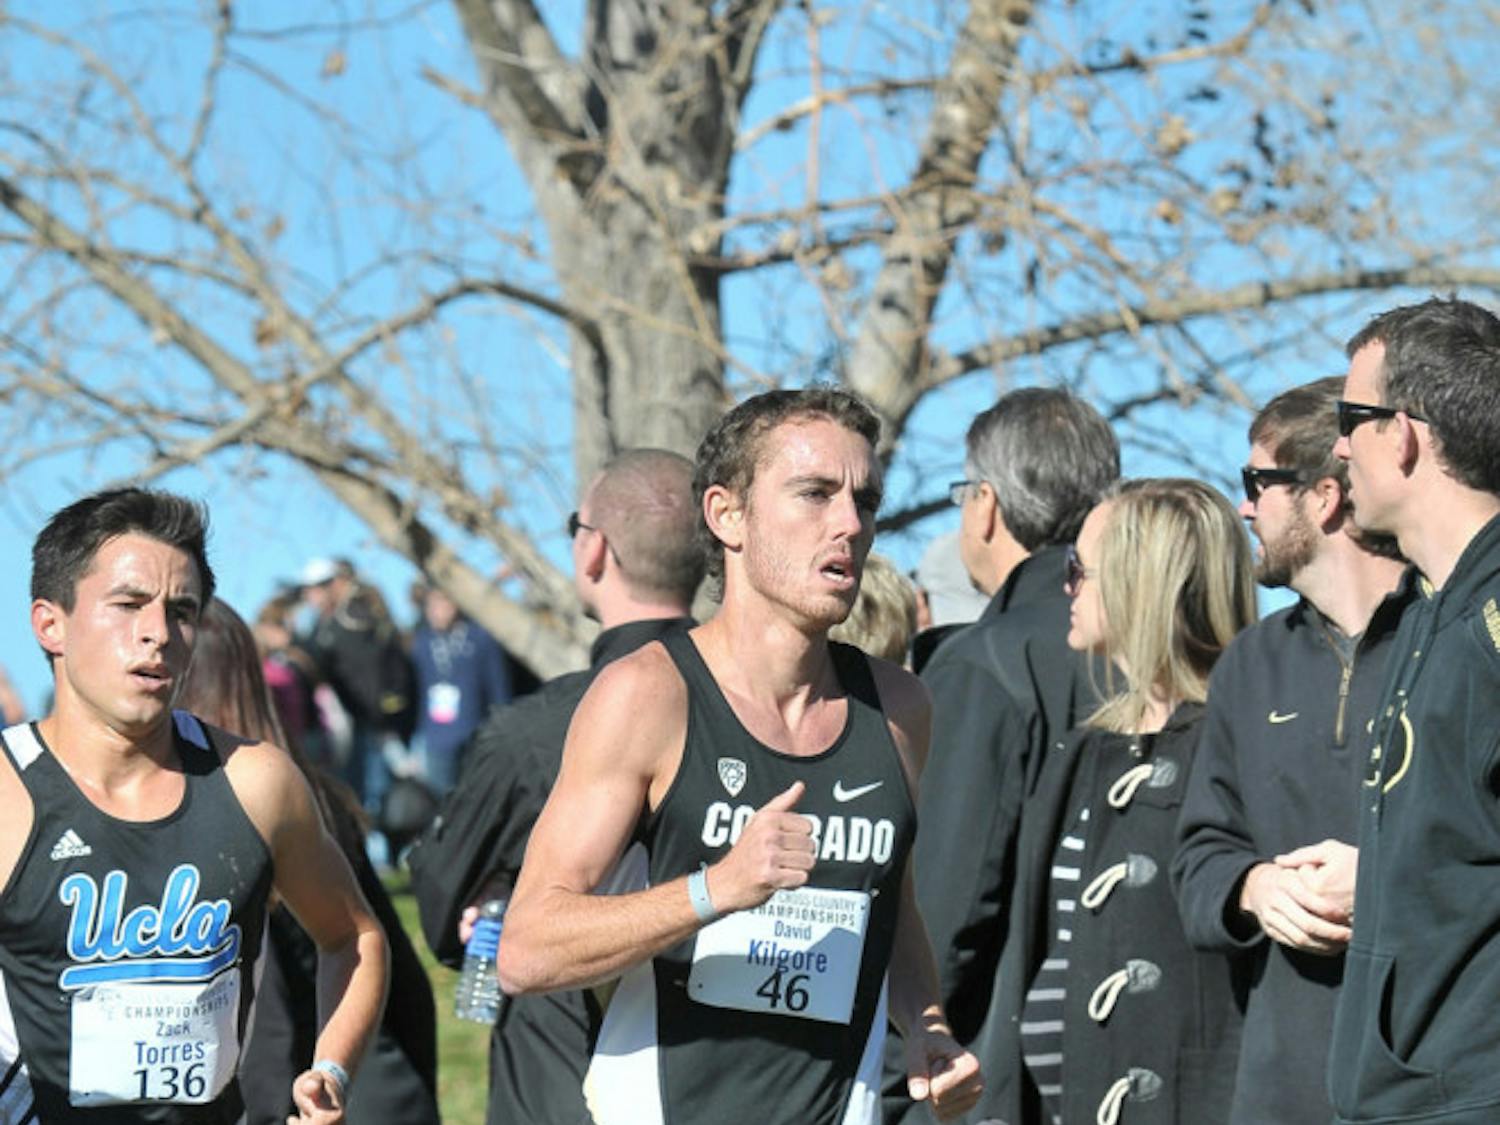 David Kilgore races in the 2013 Pac-12 Cross Country Cahmpionships in Louisville, Colo.